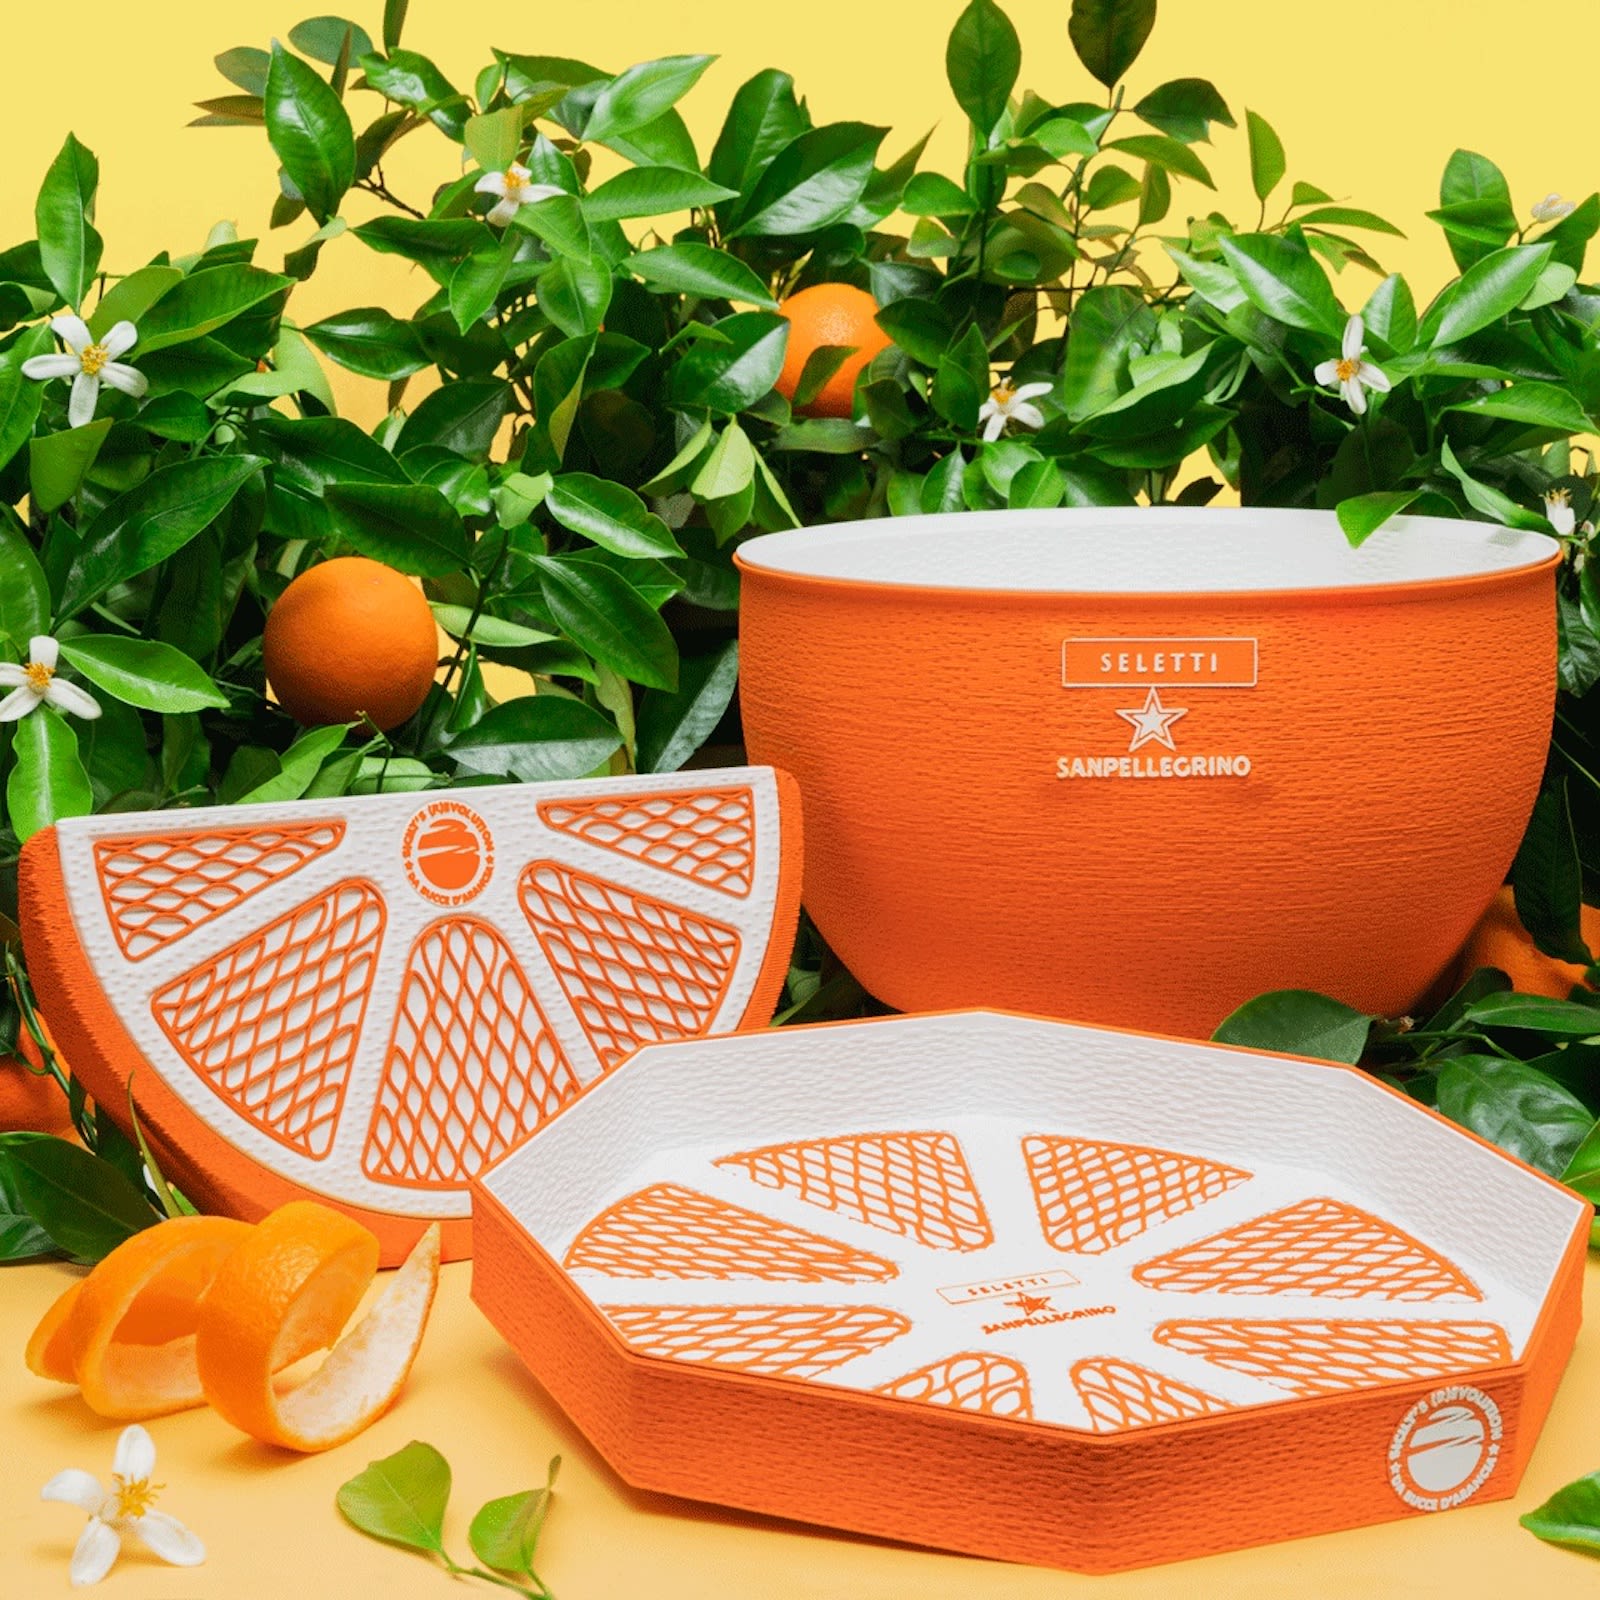 Collaborating with San Pellegrino, Krill created the "Sicily (R)evolution" project, designing a drinks tray, a glacette and a table lamp made with waste from Sicilian oranges.